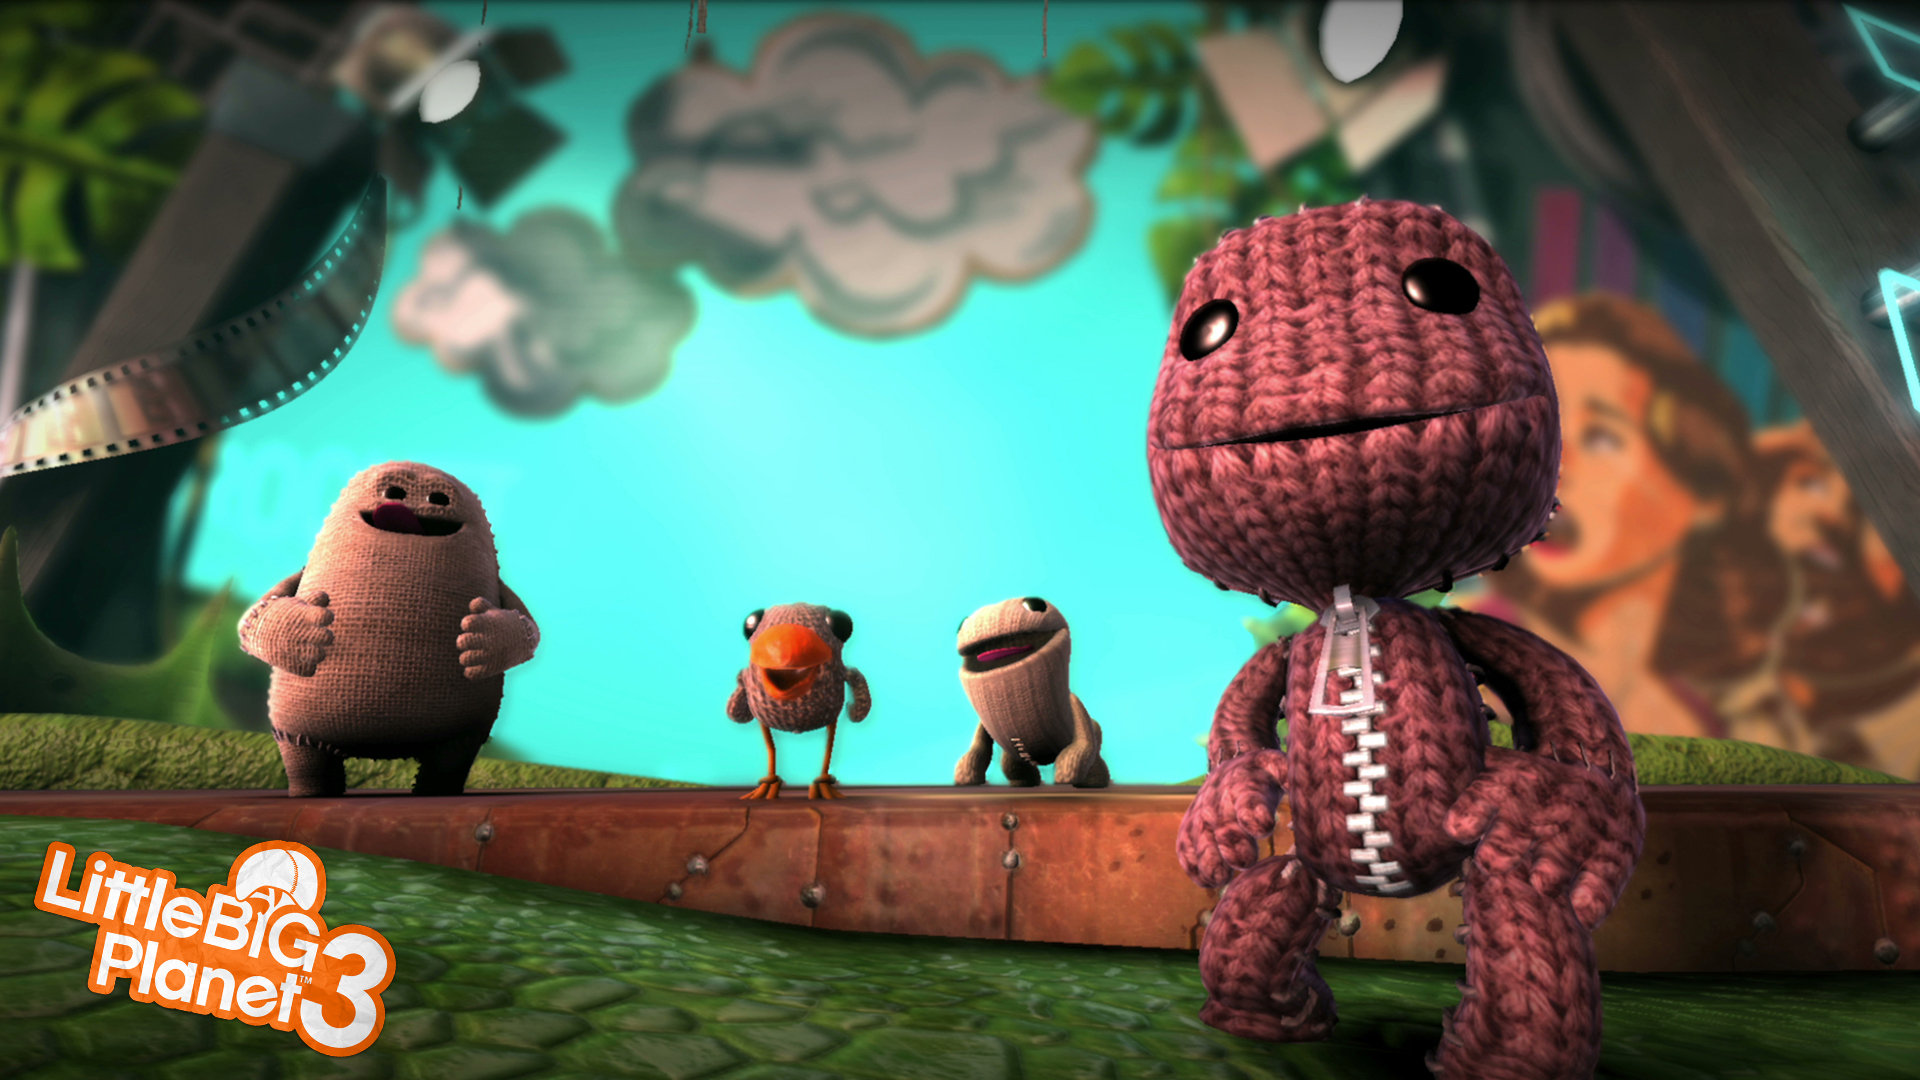 Most Viewed Littlebigplanet 3 Wallpapers 4k Wallpapers Images, Photos, Reviews